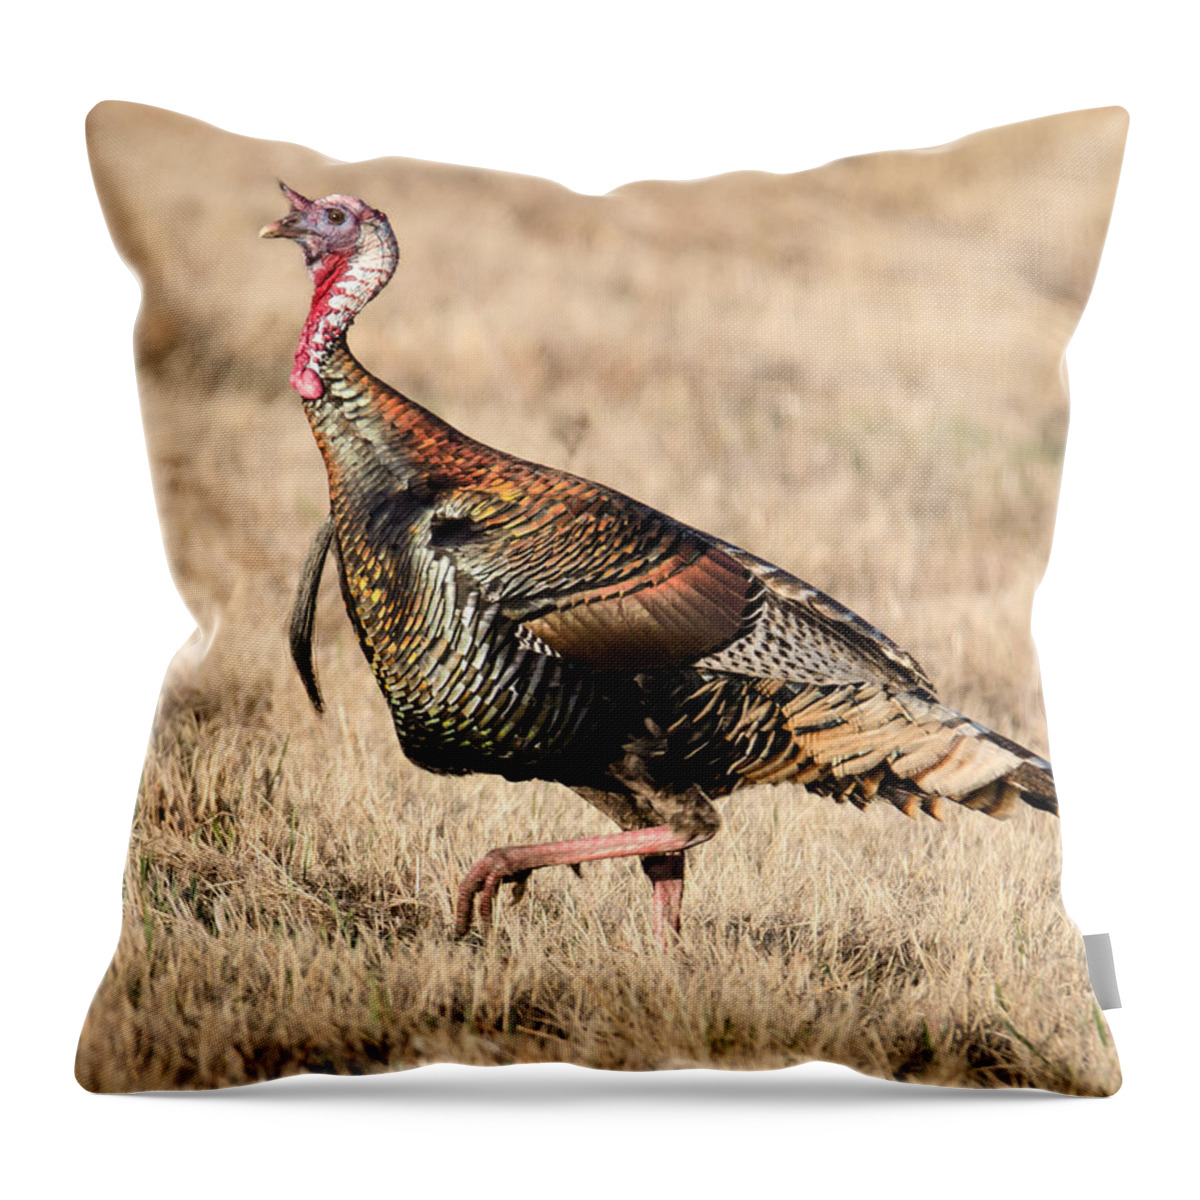 Turkey Throw Pillow featuring the photograph Stepping Out by Steve Marler